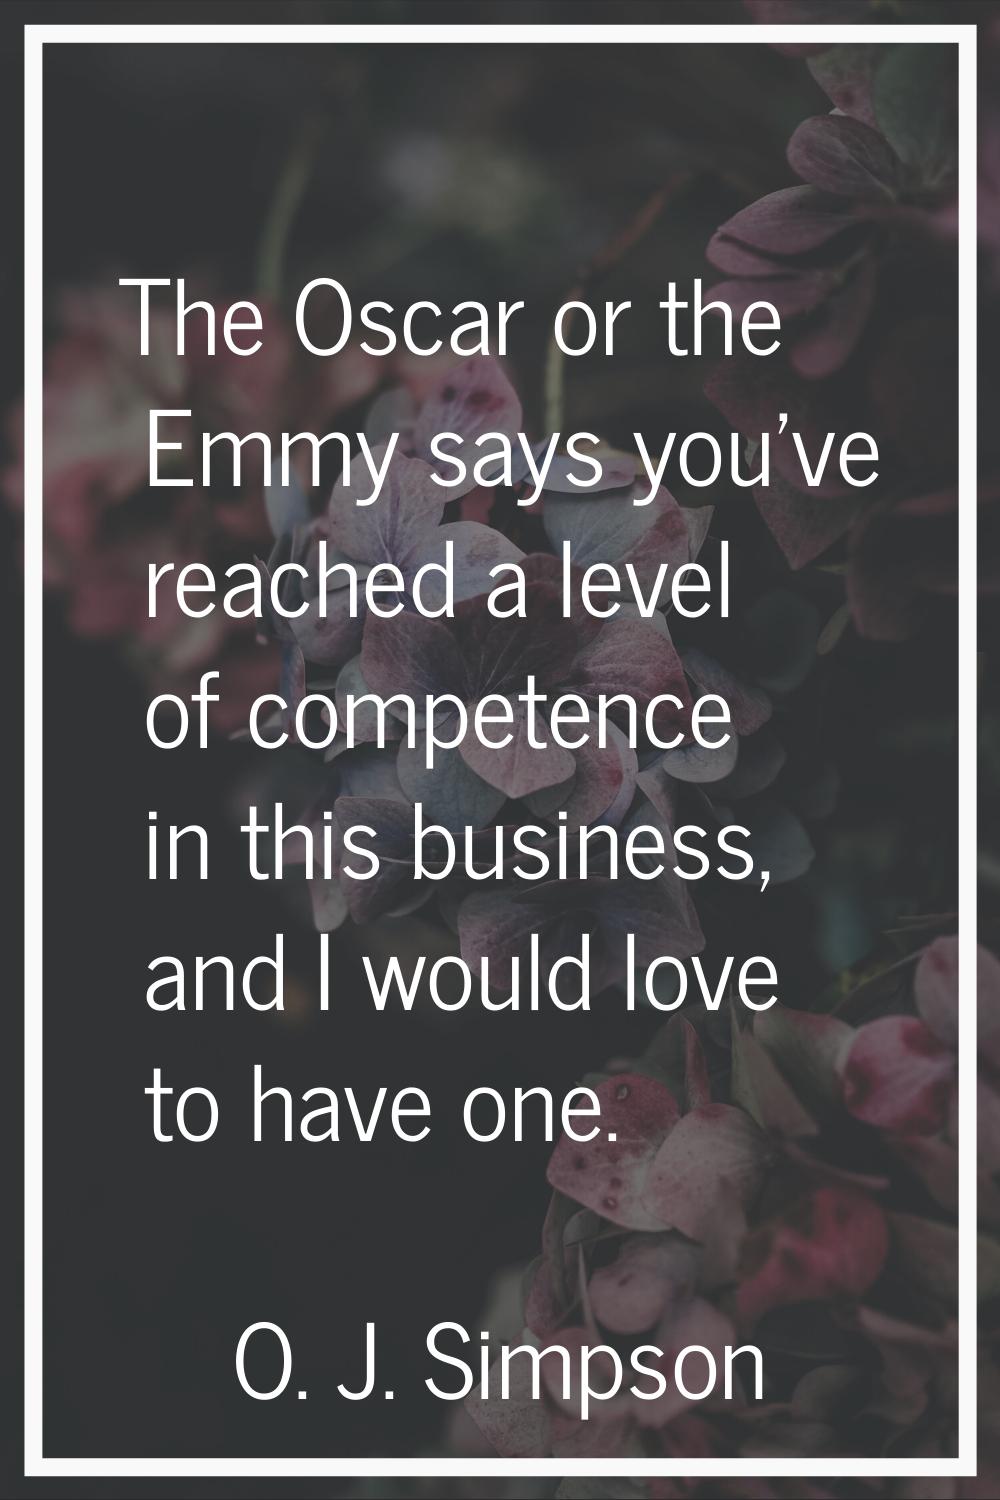 The Oscar or the Emmy says you've reached a level of competence in this business, and I would love 